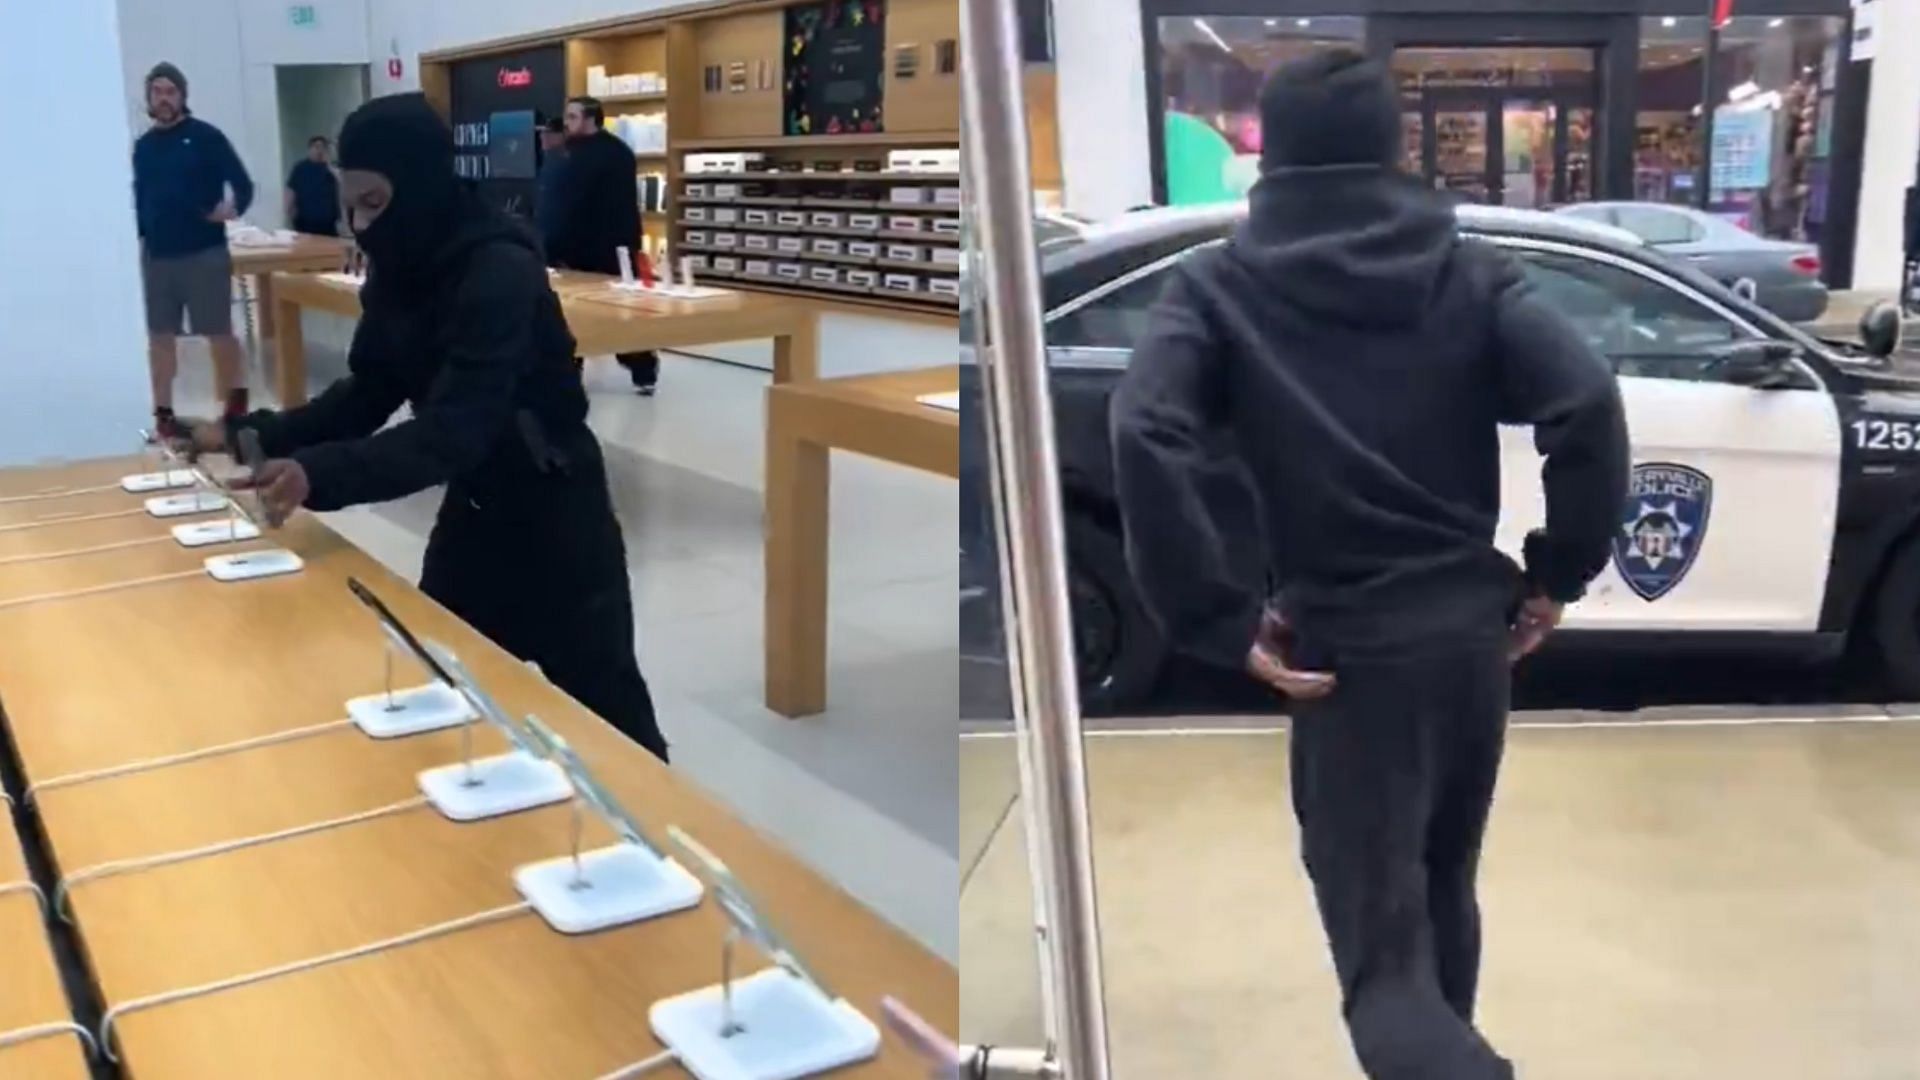 California man goes viral while stealing iPhones from an Apple store. (Image via X/Ian Miles Cheong)